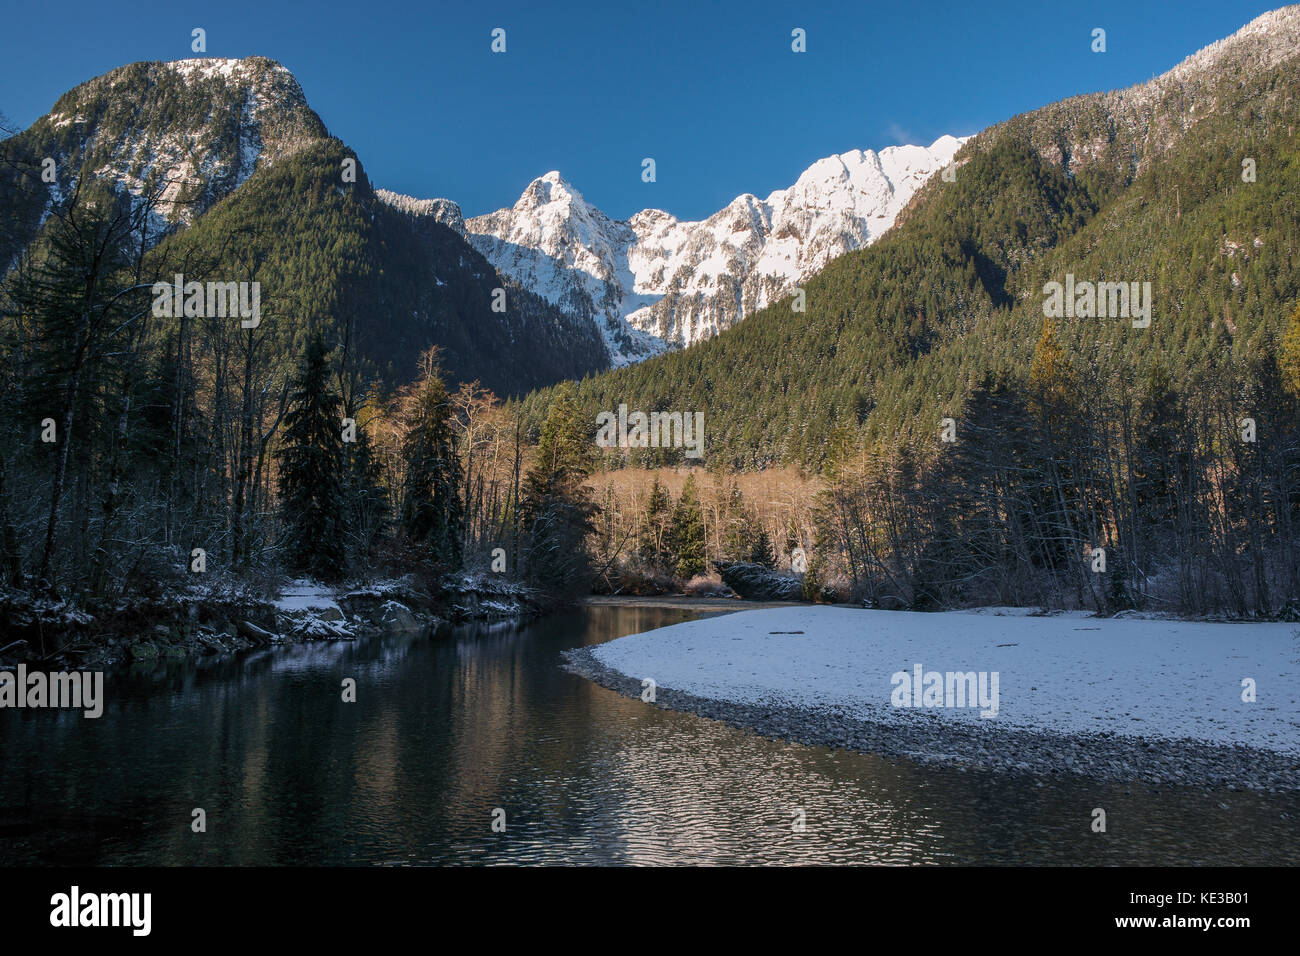 Mountains over Gold Creek in winter in Golden Ears provincial park, British Columbia, Canada Stock Photo